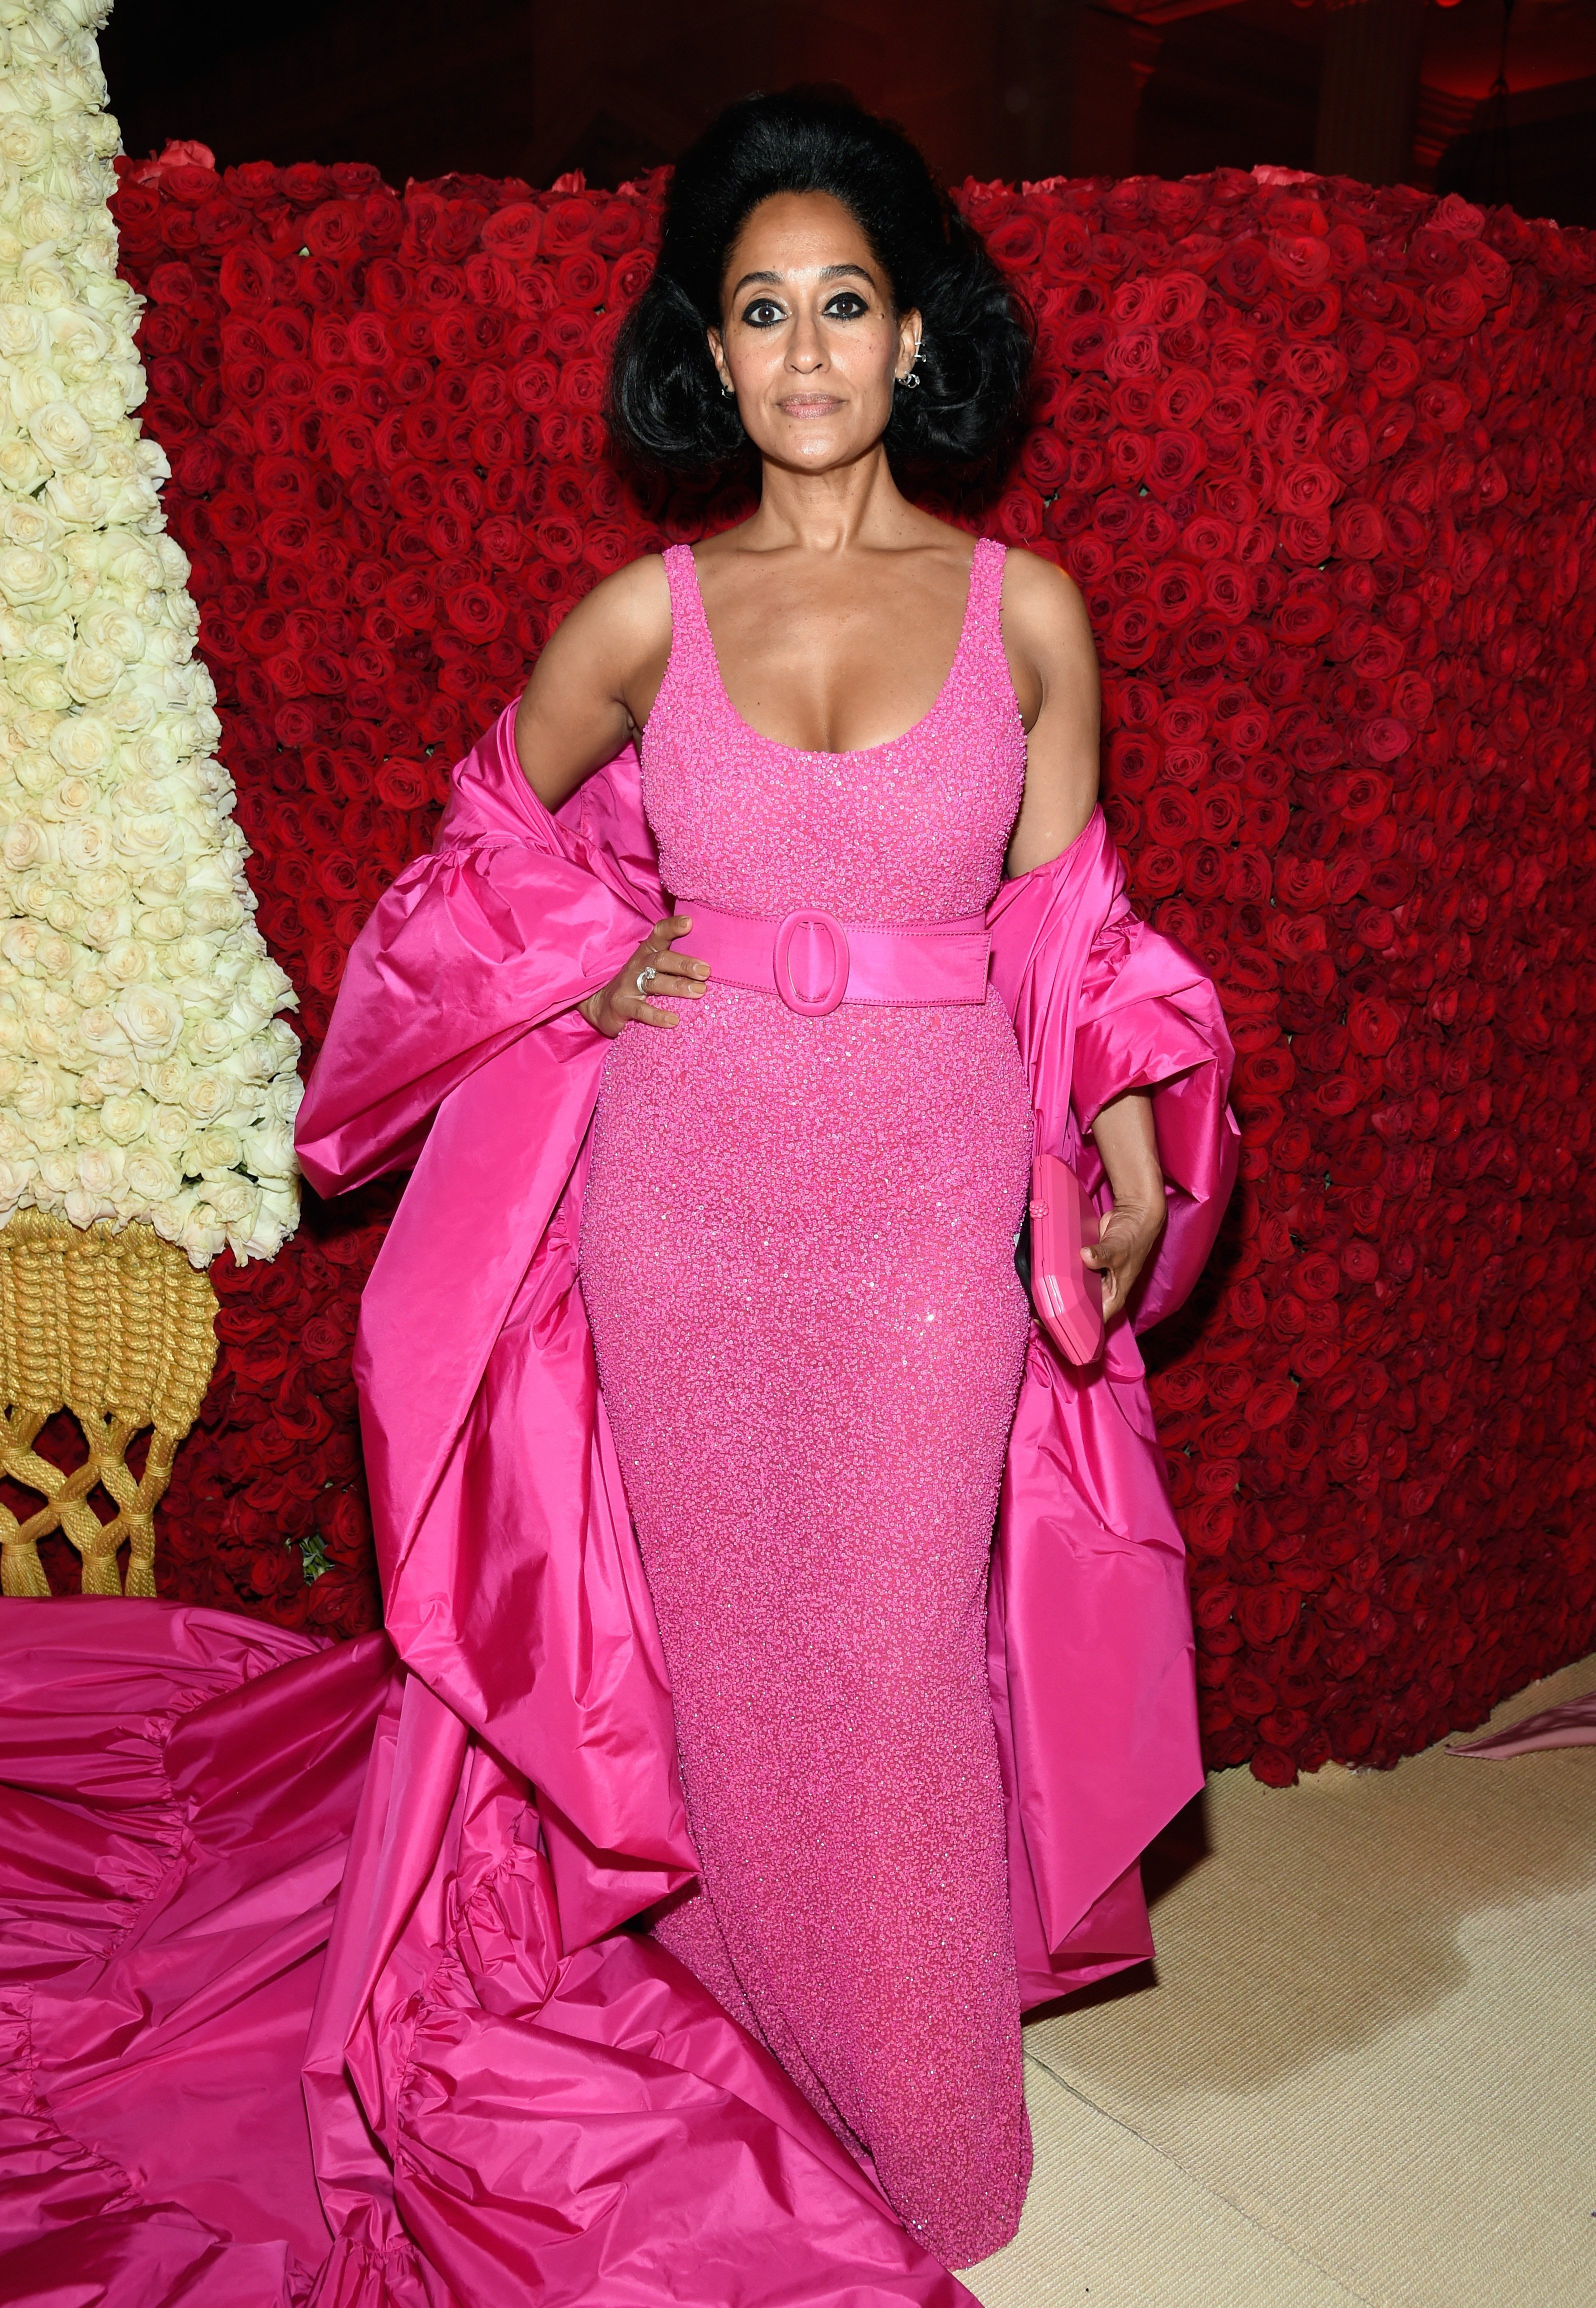 Tracee Ellis Ross attends the Met Gala in New York City on May 7, 2018 | Photo: Getty Images